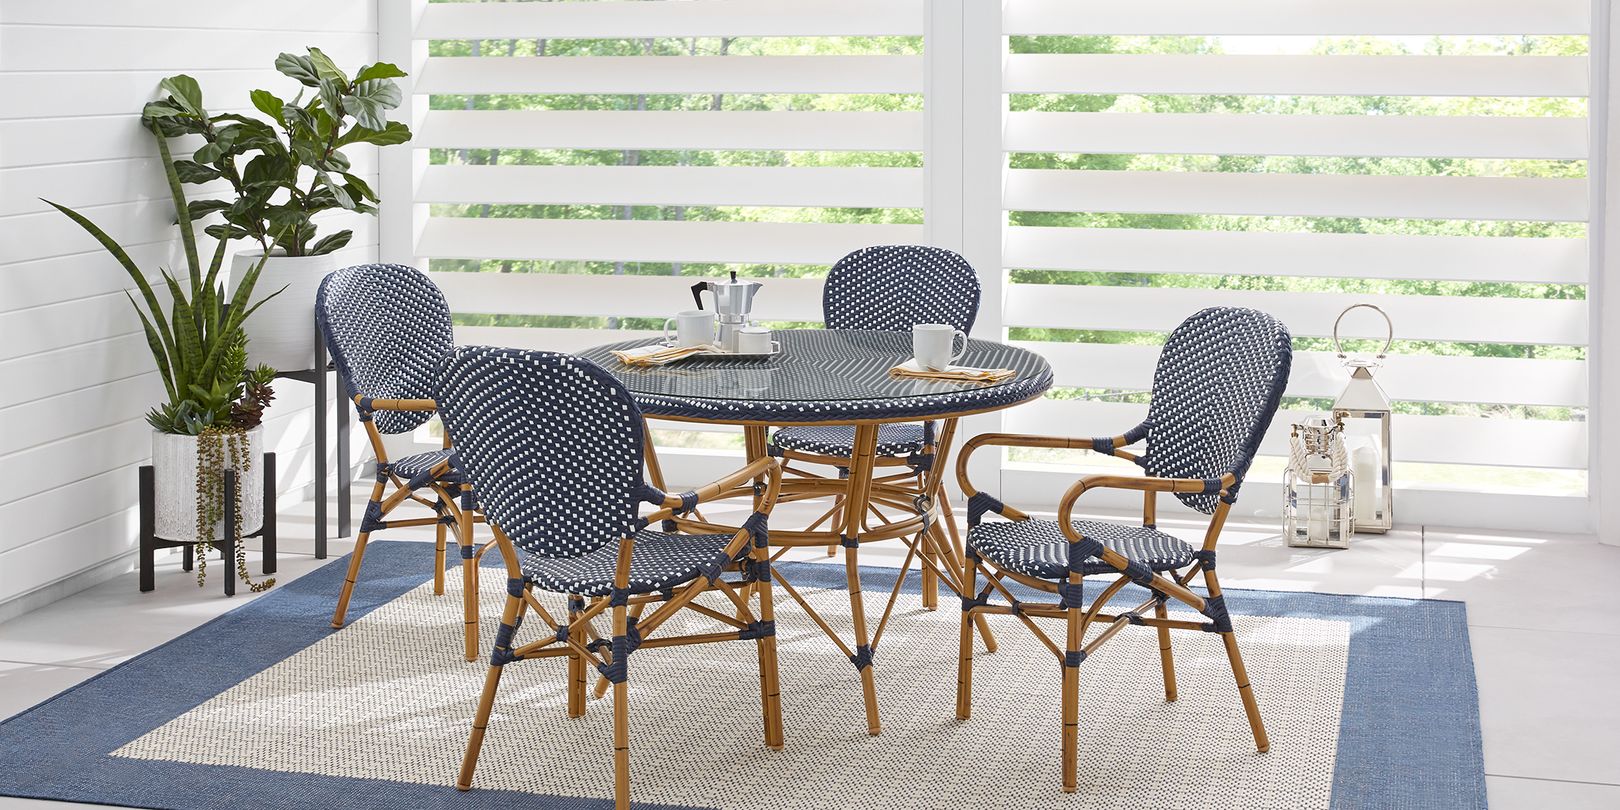 Photo of blue and tan wicker outdoor dining set